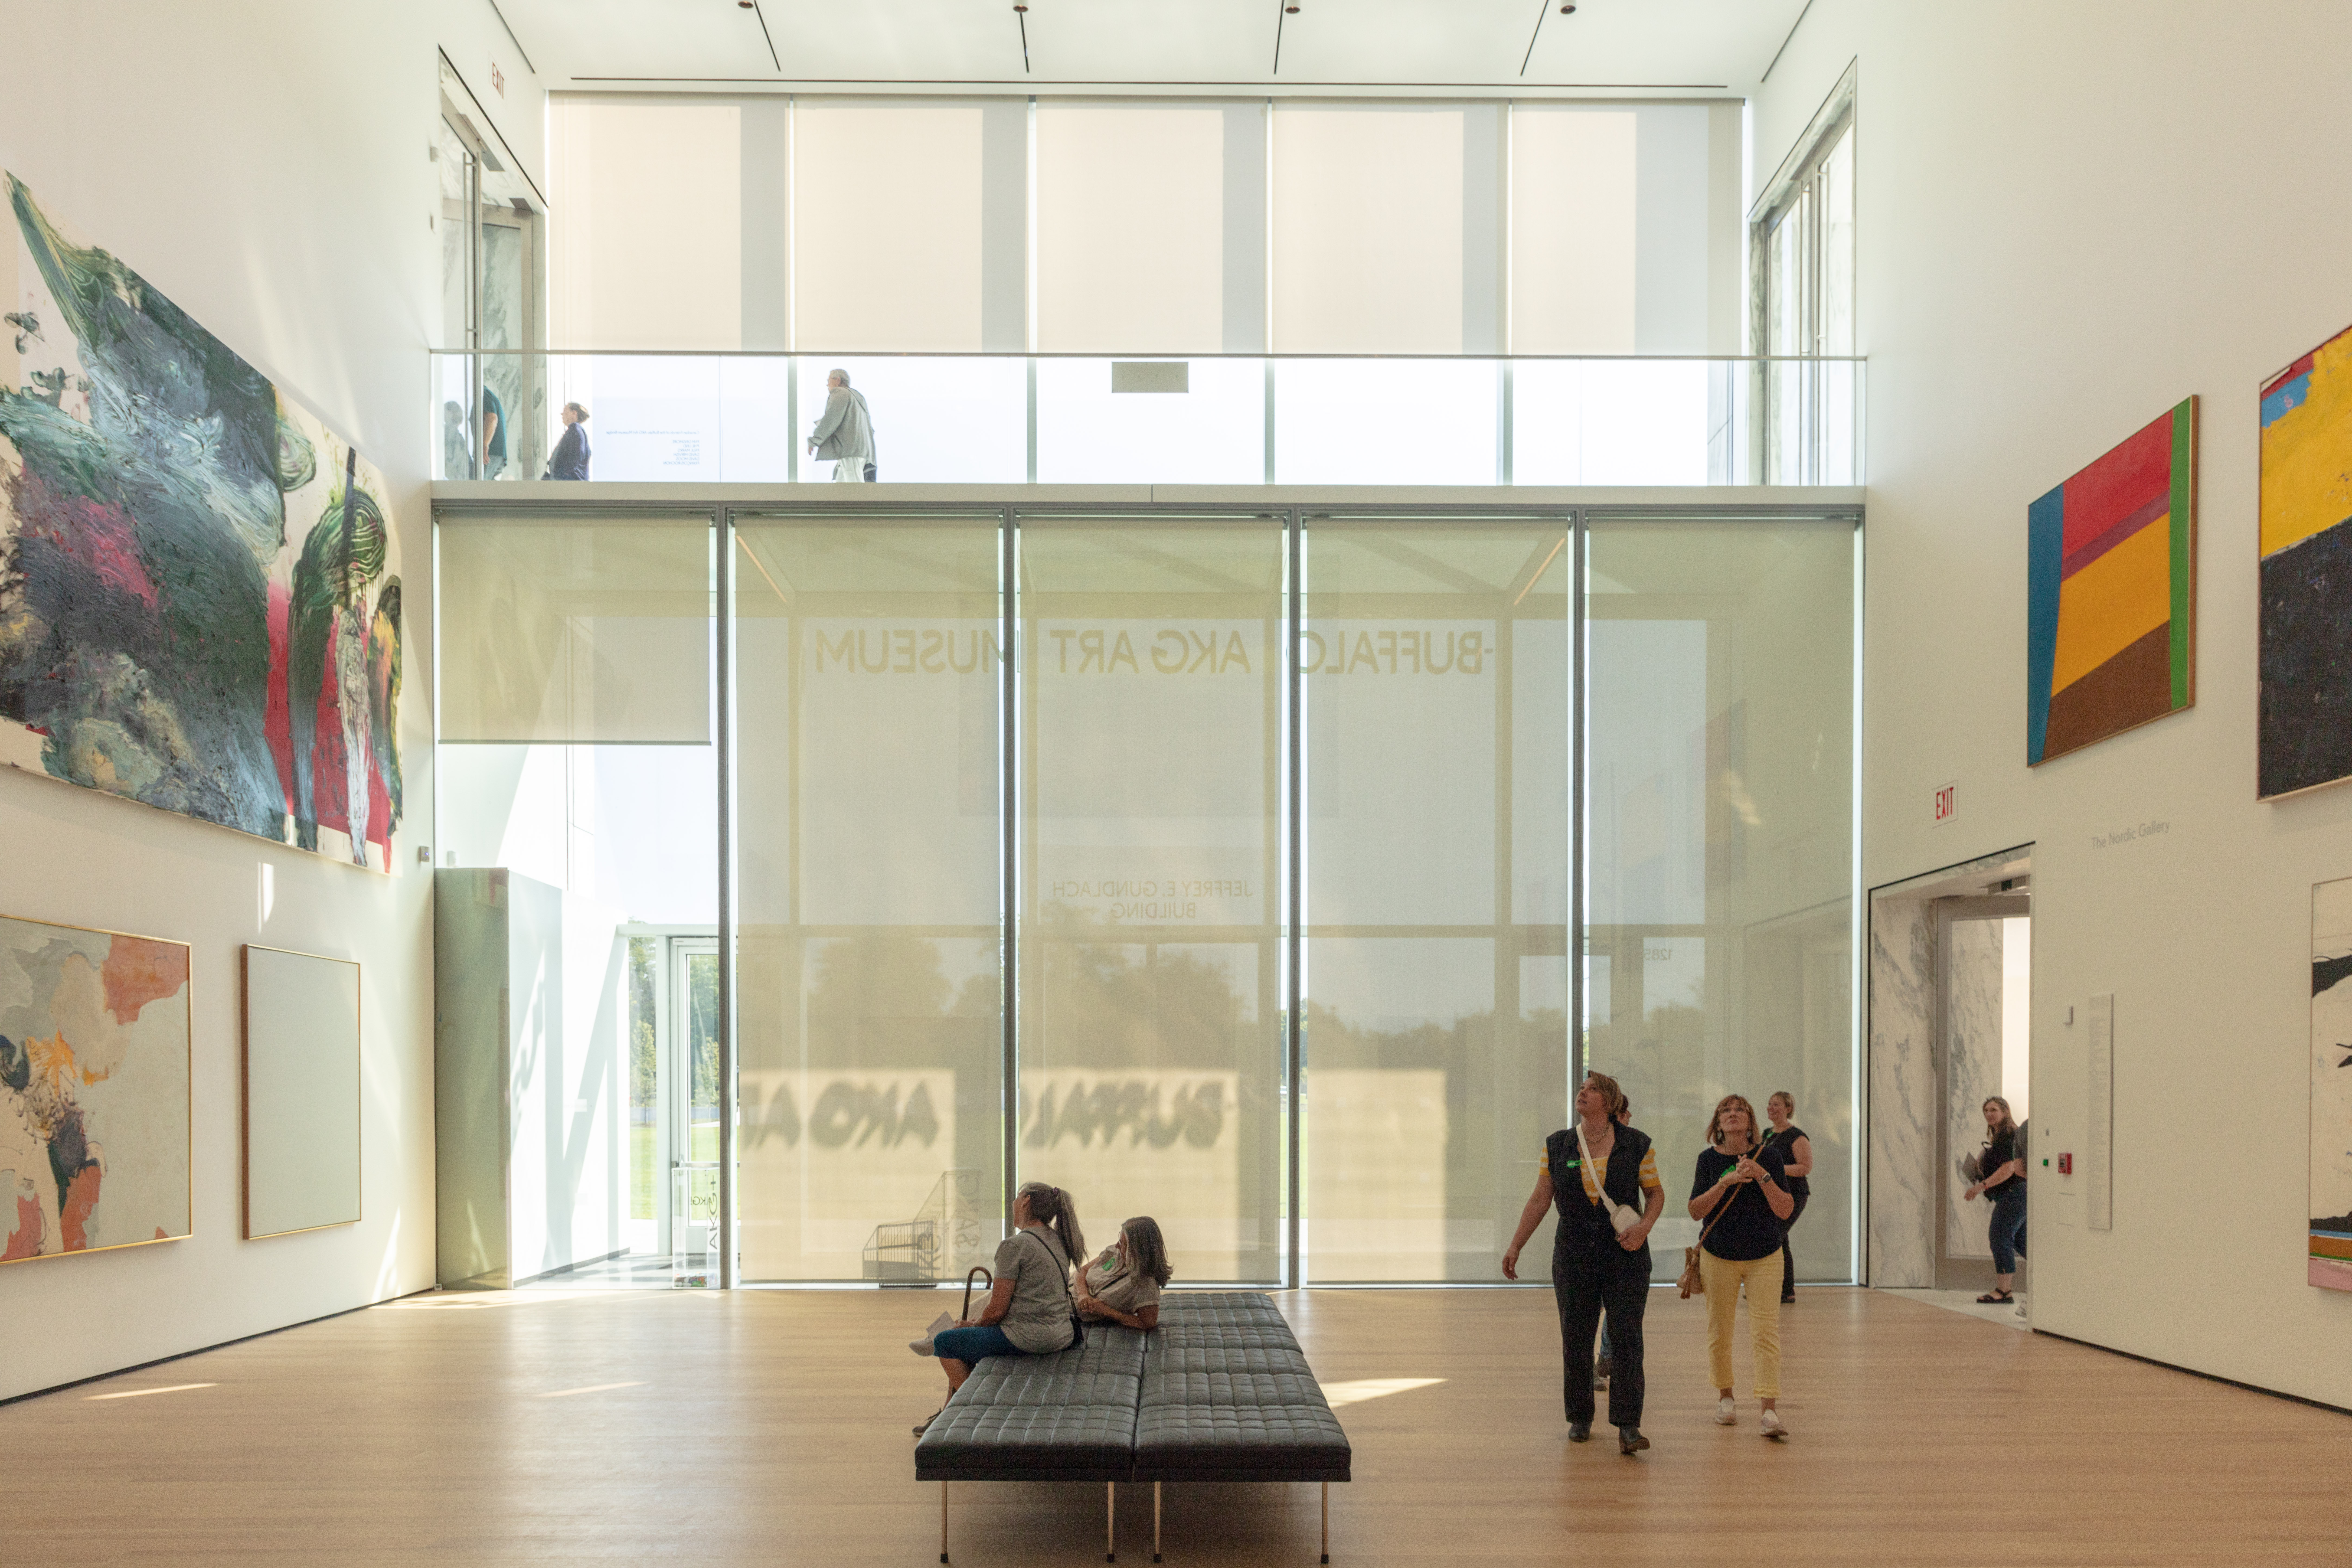 A large gallery with floor to ceiling windows